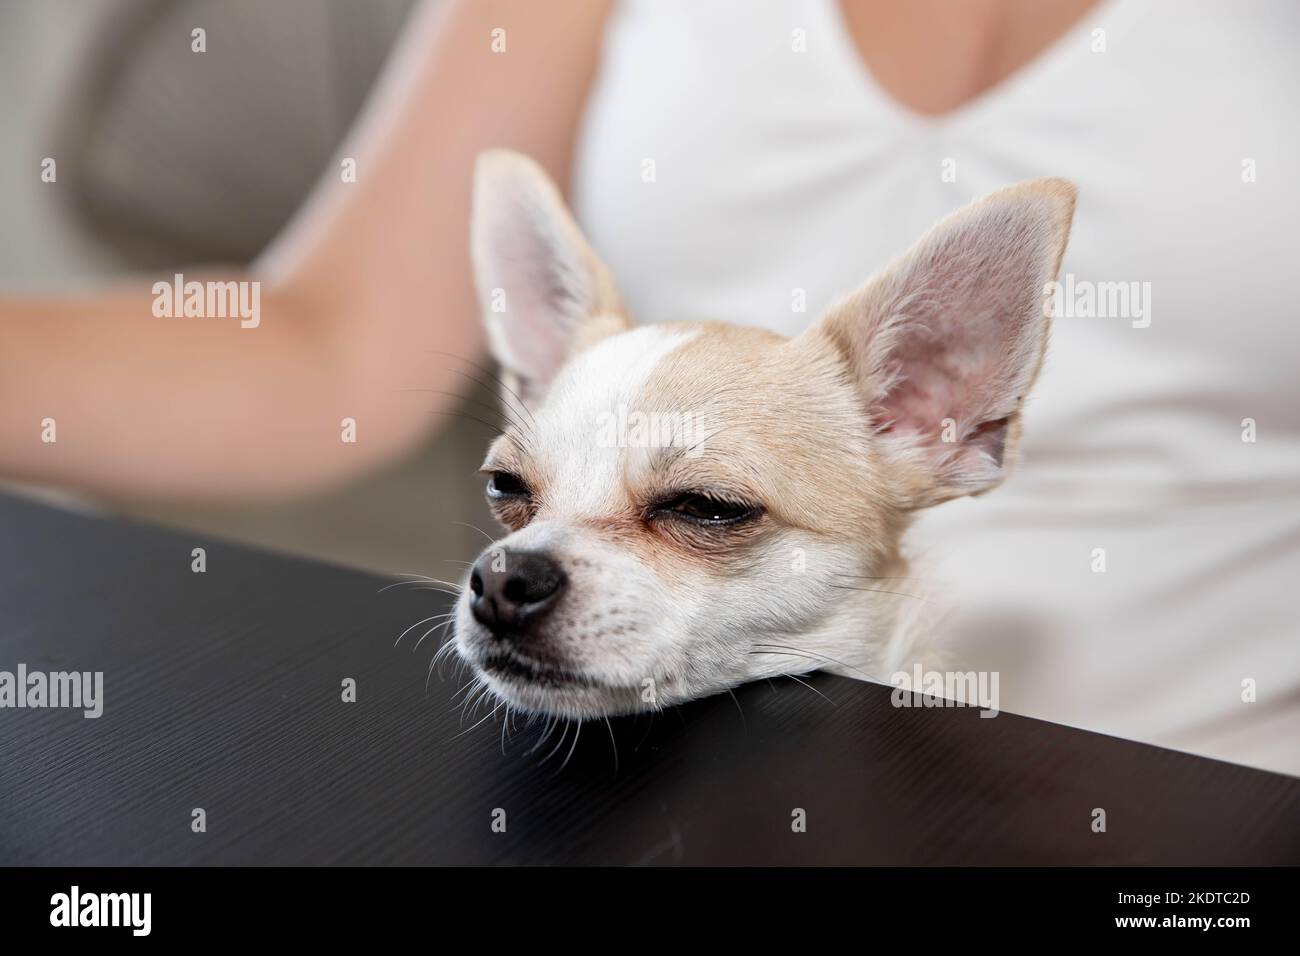 The dog put its head on the table Stock Photo